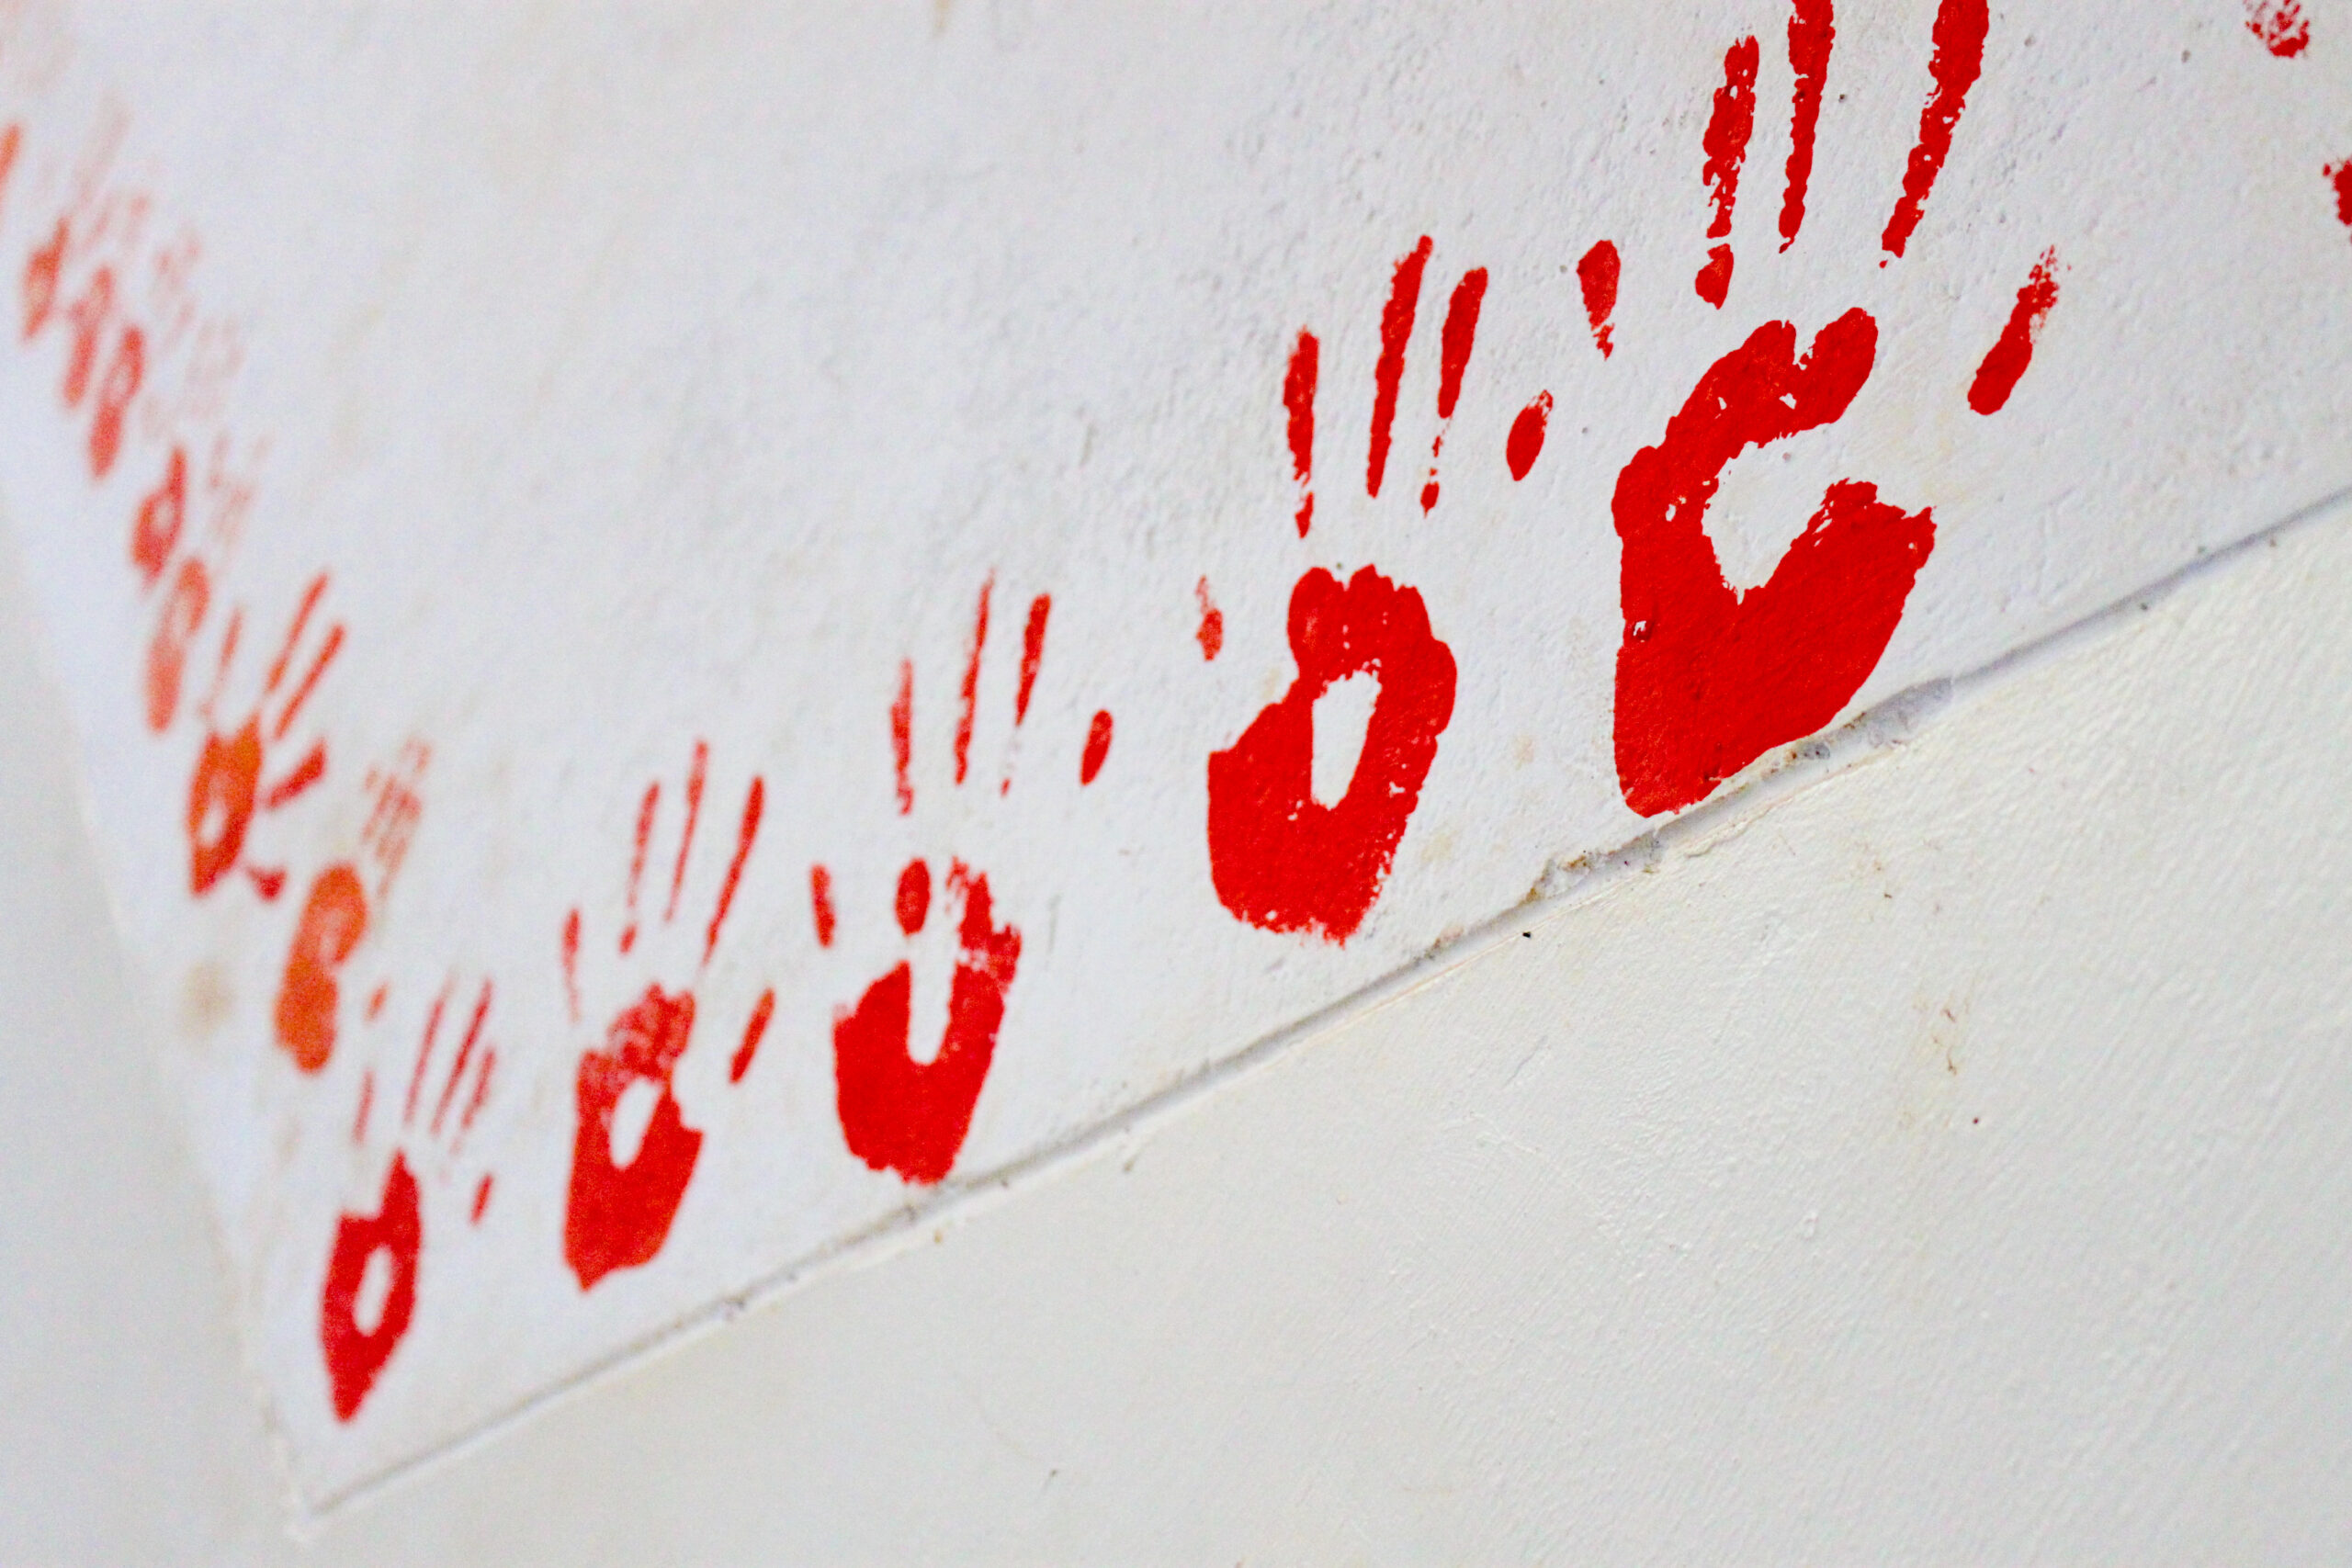 Picture of multiple red hand prints on a white wall.